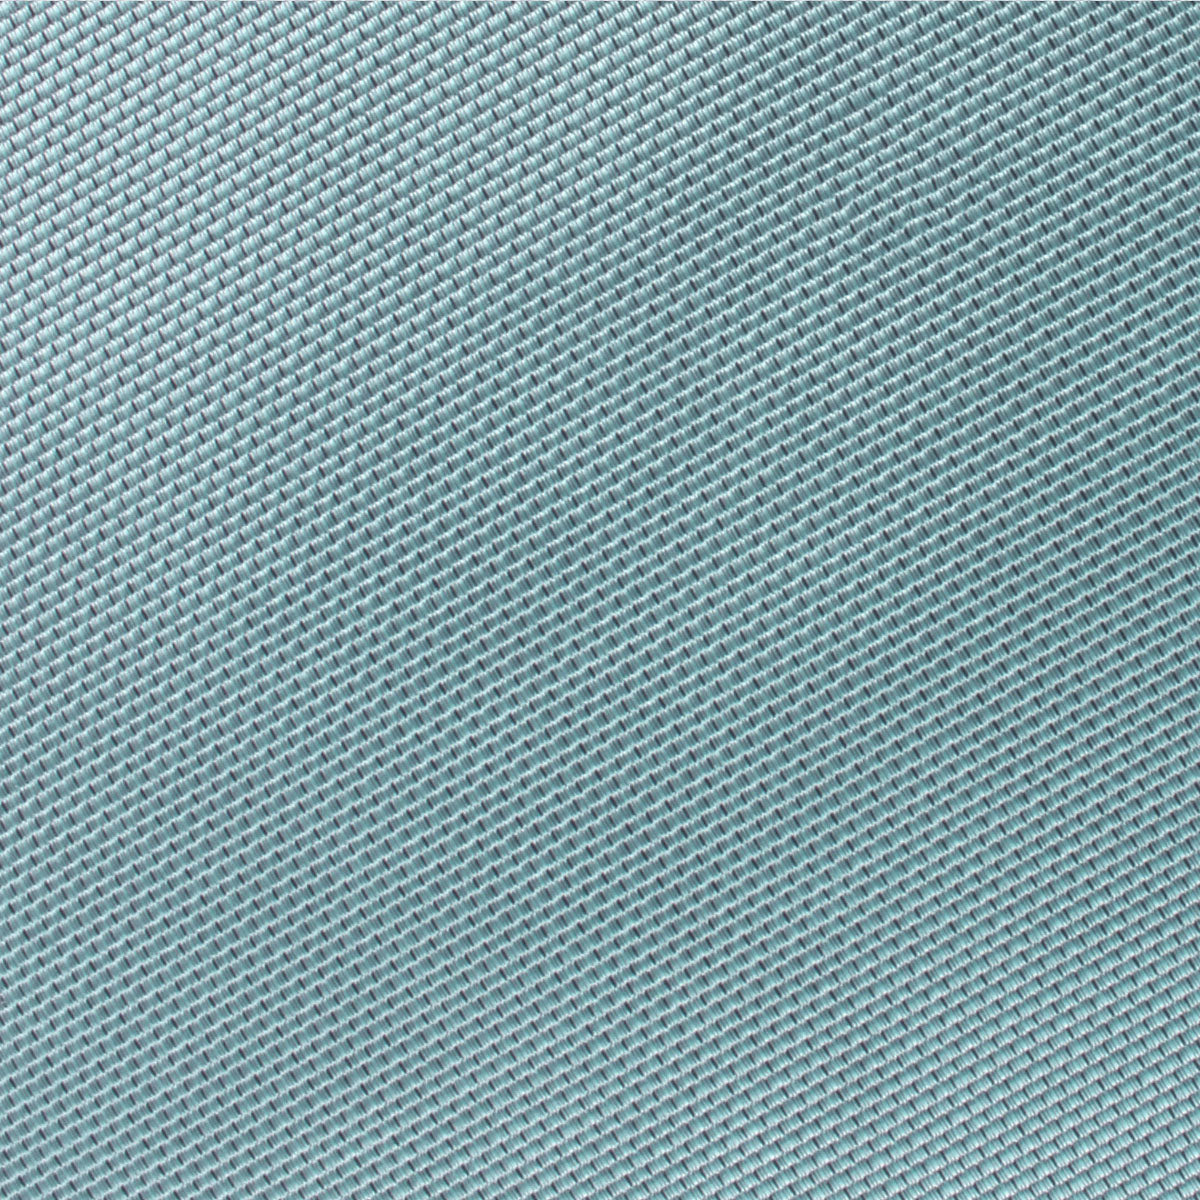 Turkish Teal Blue Weave Bow Tie Fabric